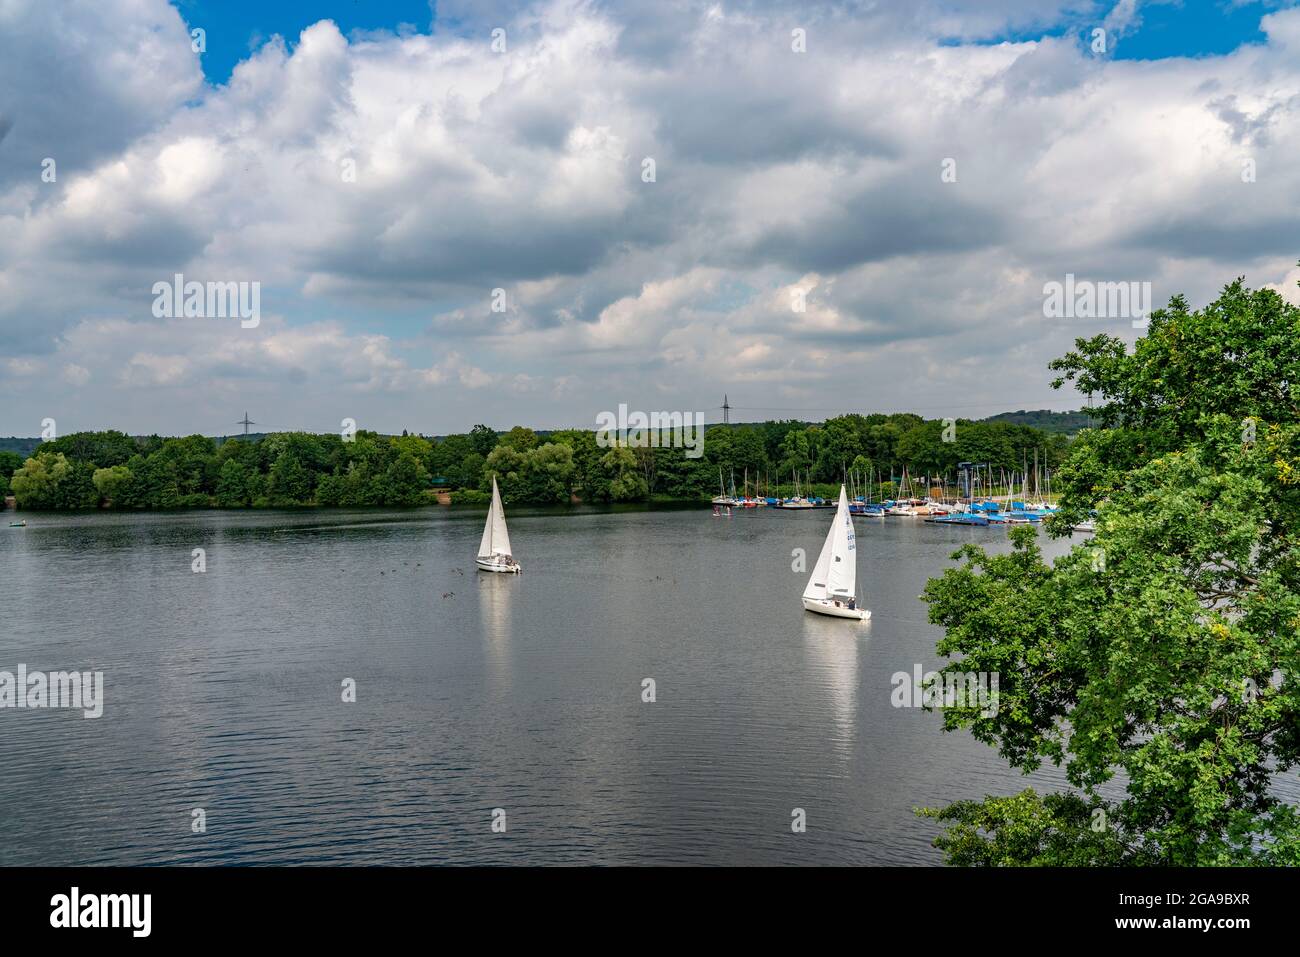 Duisburg Sechs Seen Platte High Resolution Stock Photography and Images -  Alamy